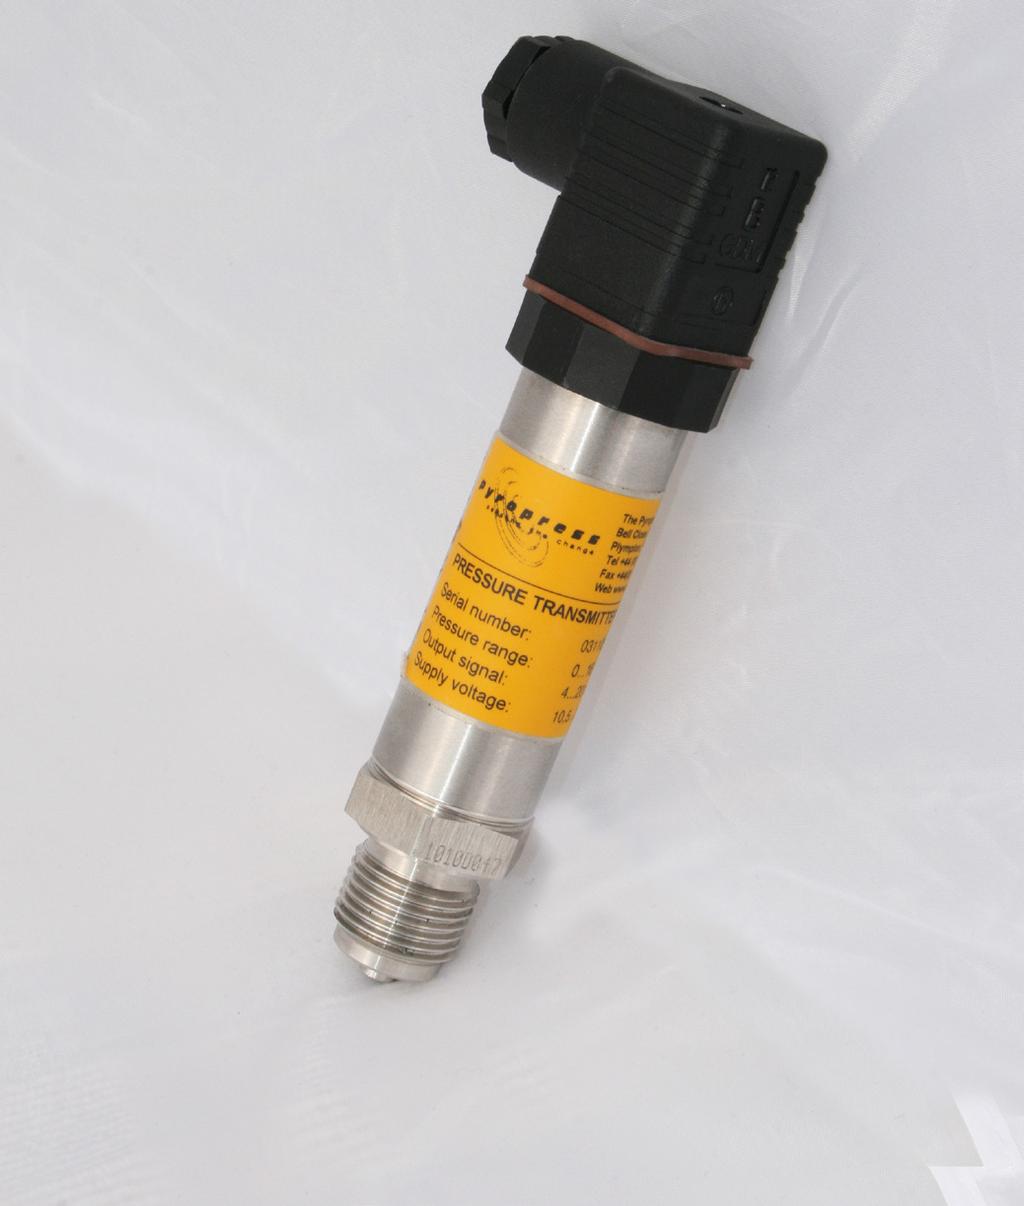 PRESSURE PYRP-28 INDUSTRIAL & INTRINSICALLY SAFE PRESSURE The PYRP-28 pressure transmitter is suitable for the measurement of pressure, vacuum and absolute pressure of gases, vapours and liquids for